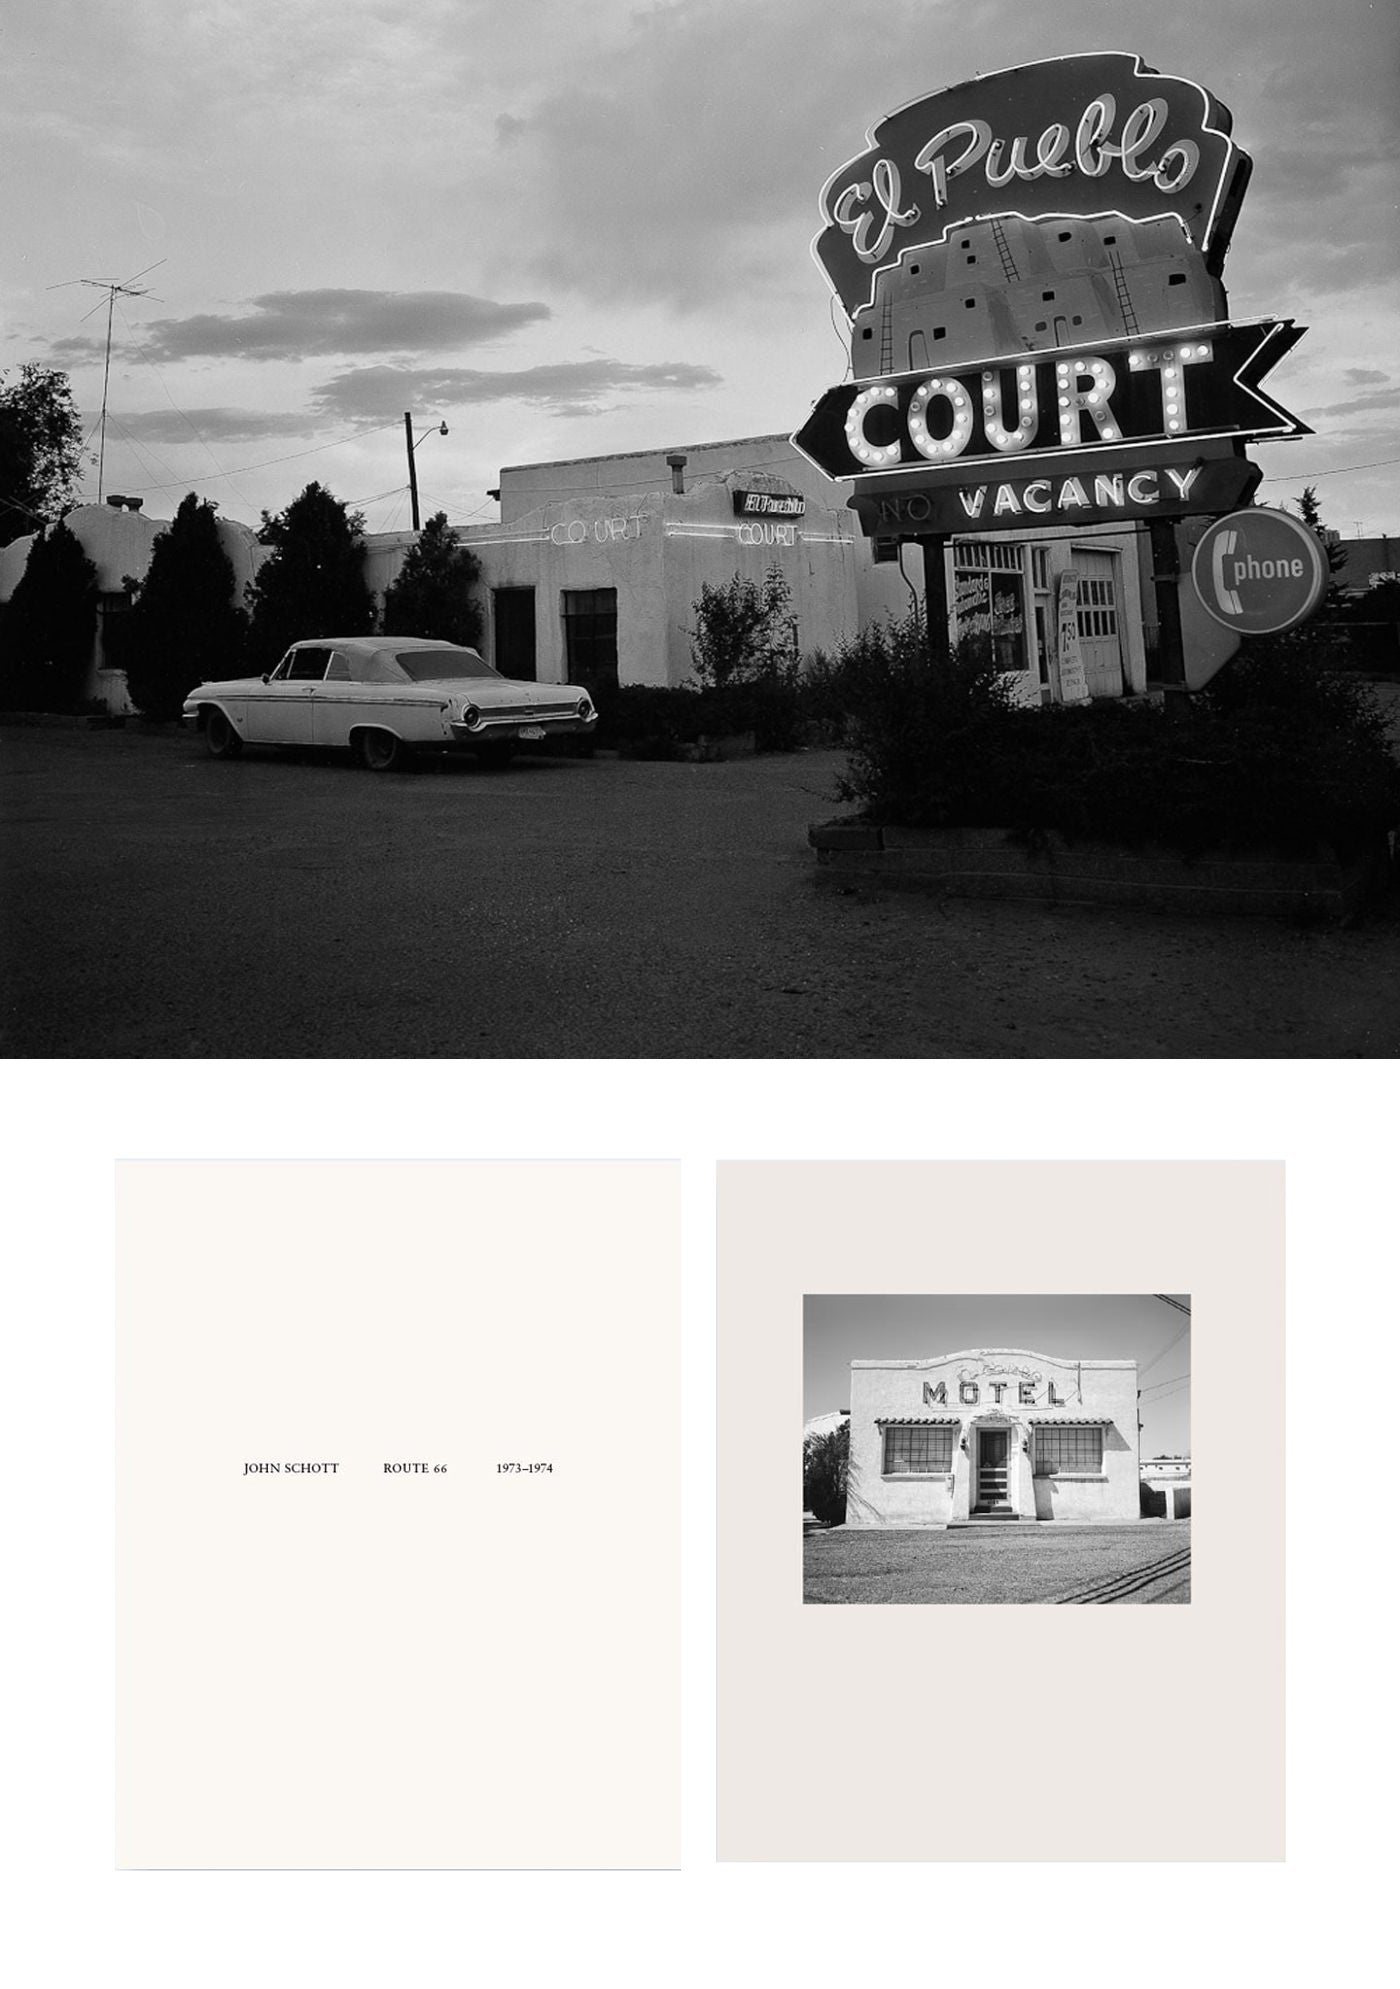 NZ Library #1: John Schott: Route 66, Special Limited Edition (with Gelatin Silver Contact Print "Untitled" from the Series "Route 66 Motels," El Pueblo Court Motel with Neon Vacancy Sign) (NZ Library - Set One, Volume Six)